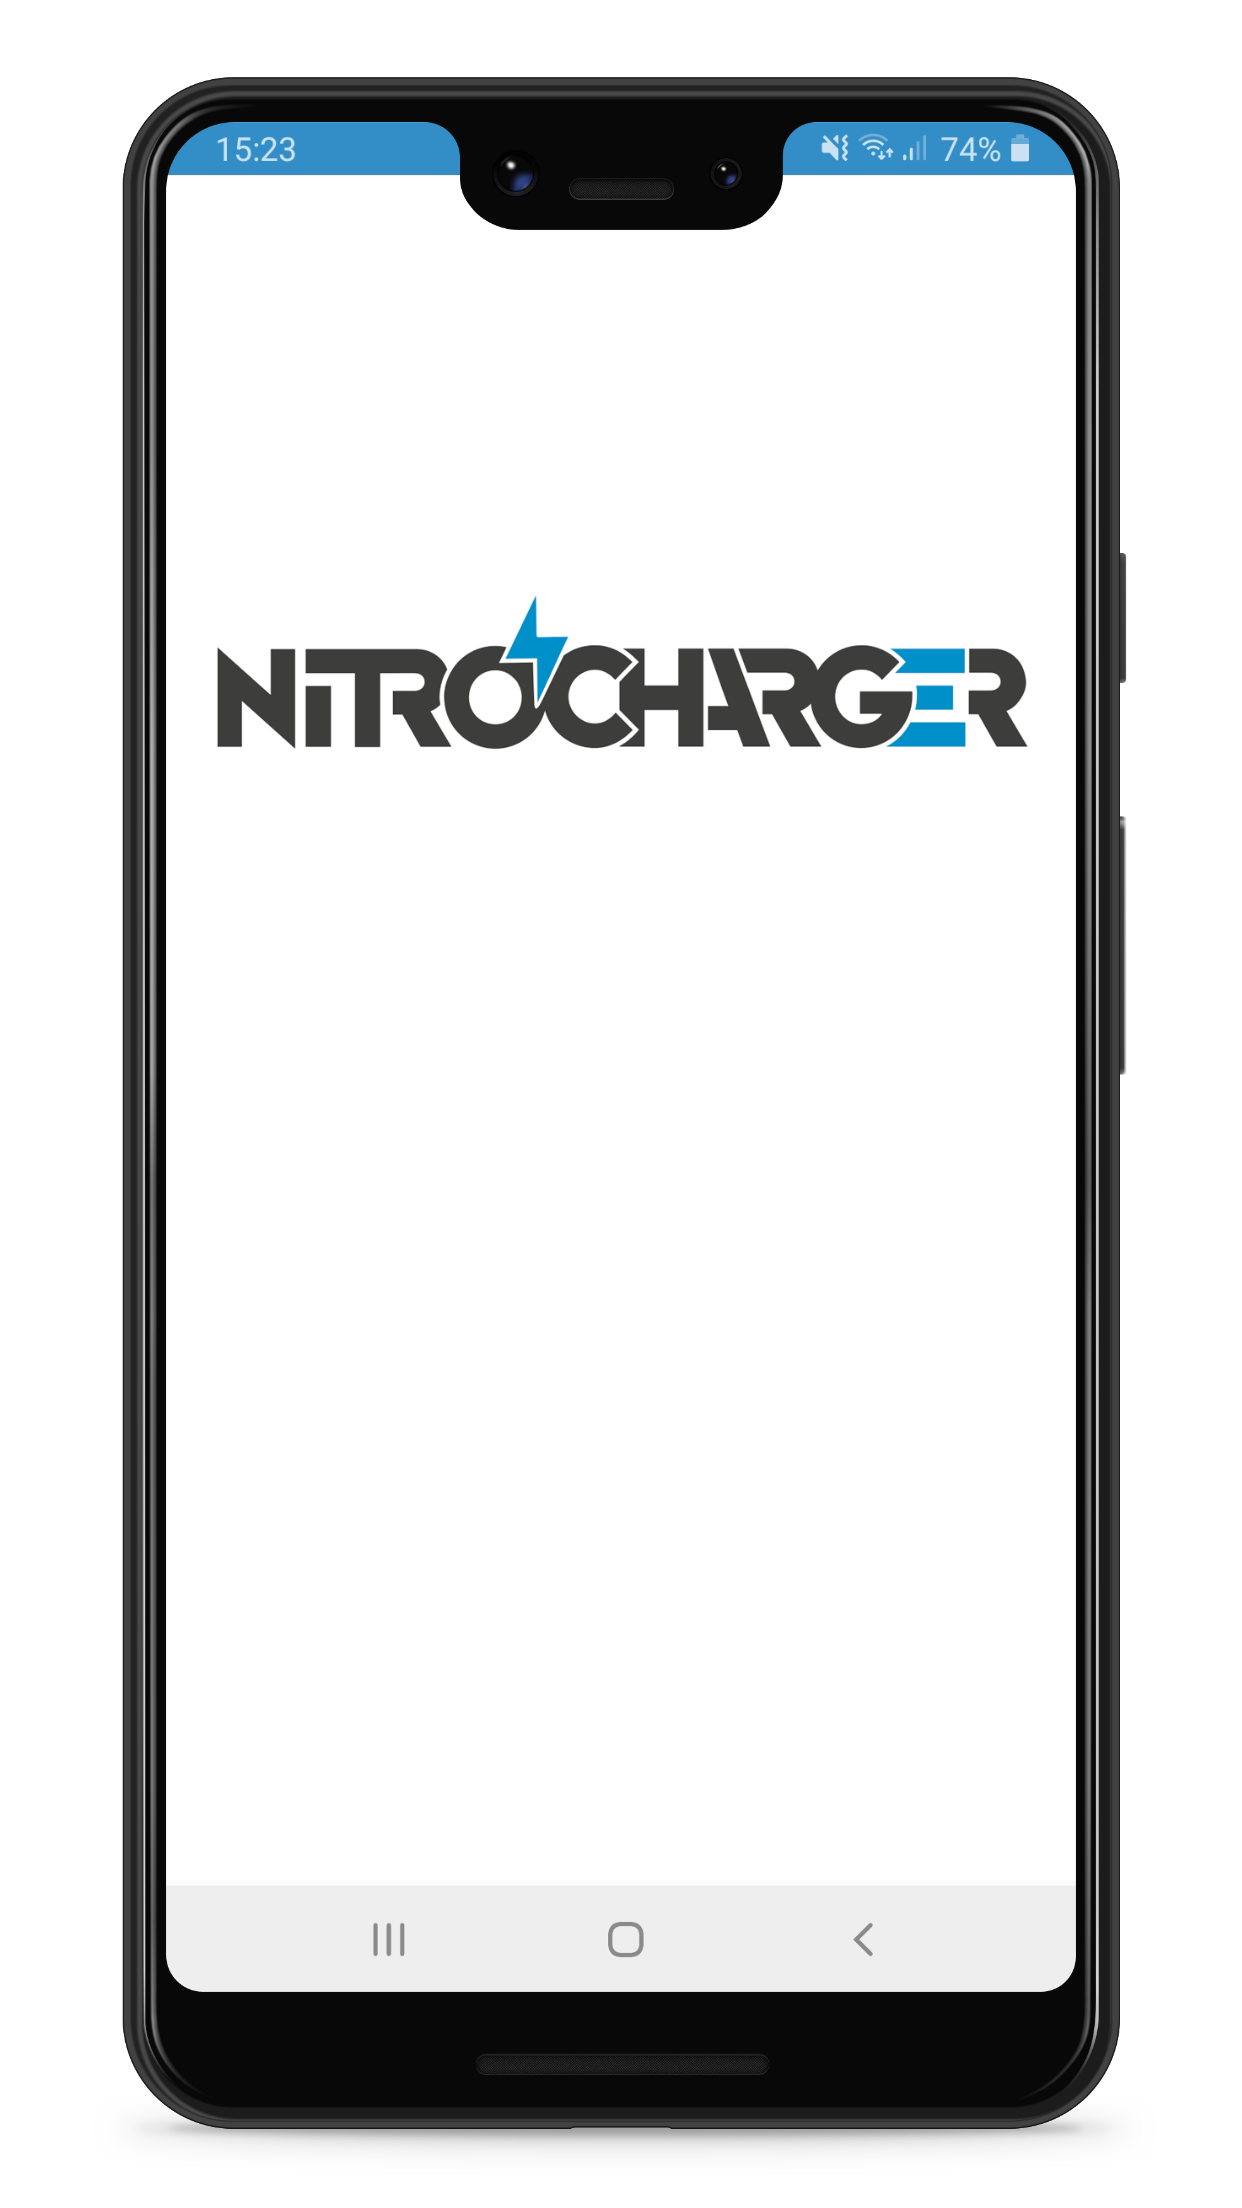 NITROCHARGER - Commercial picture